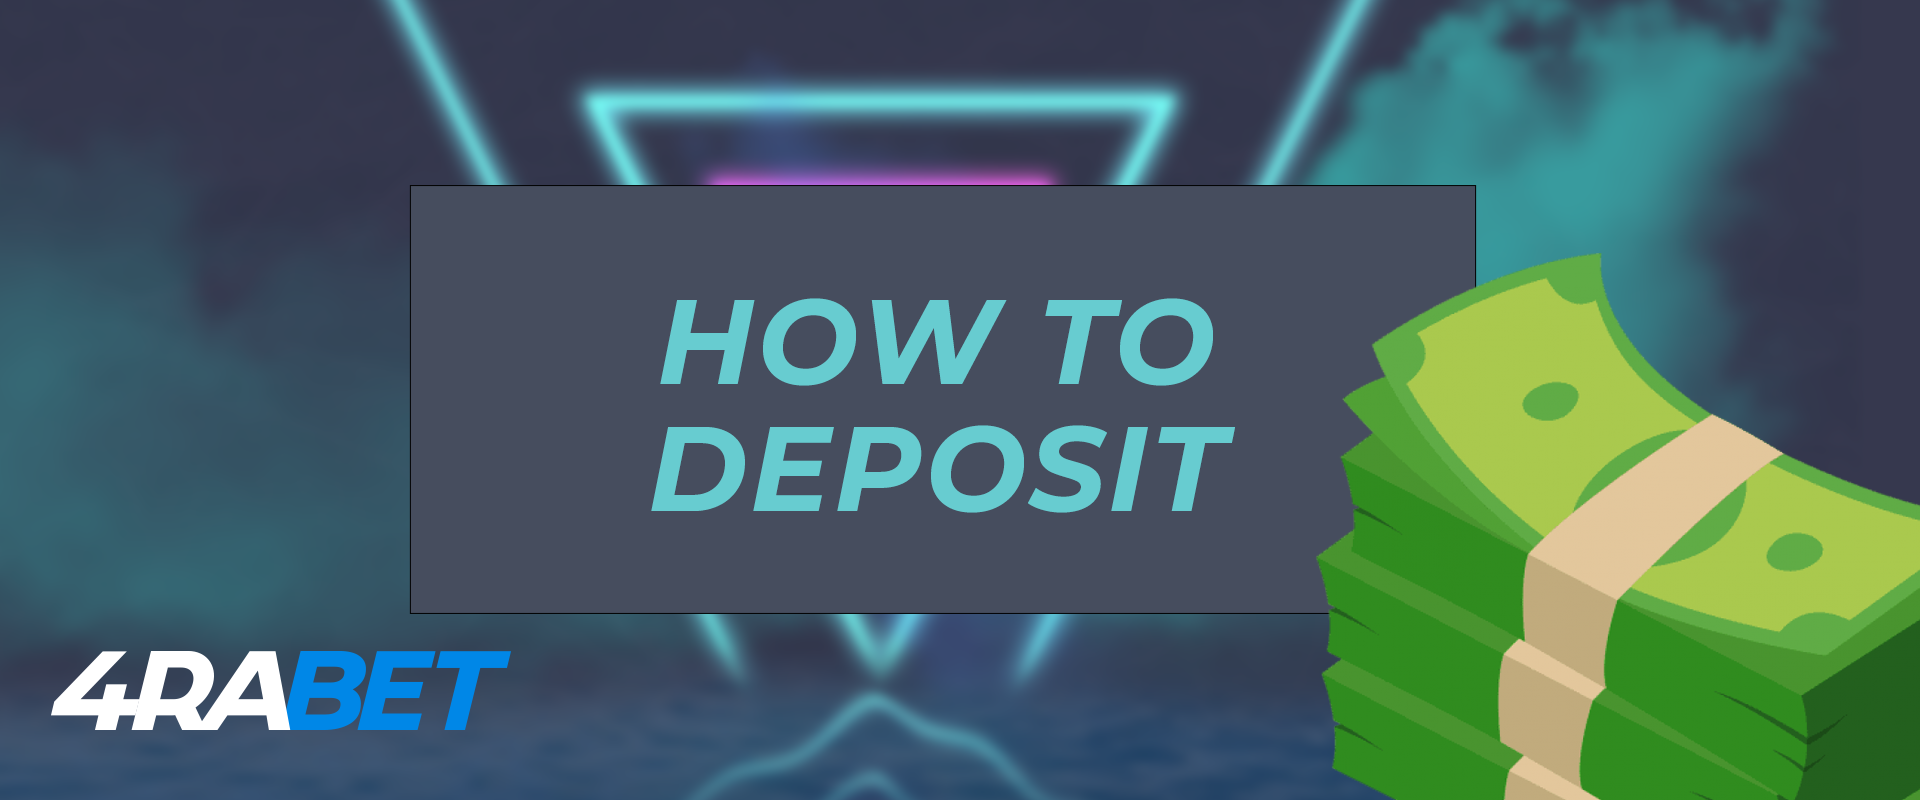 All deposit methods existing on the 4rabet.